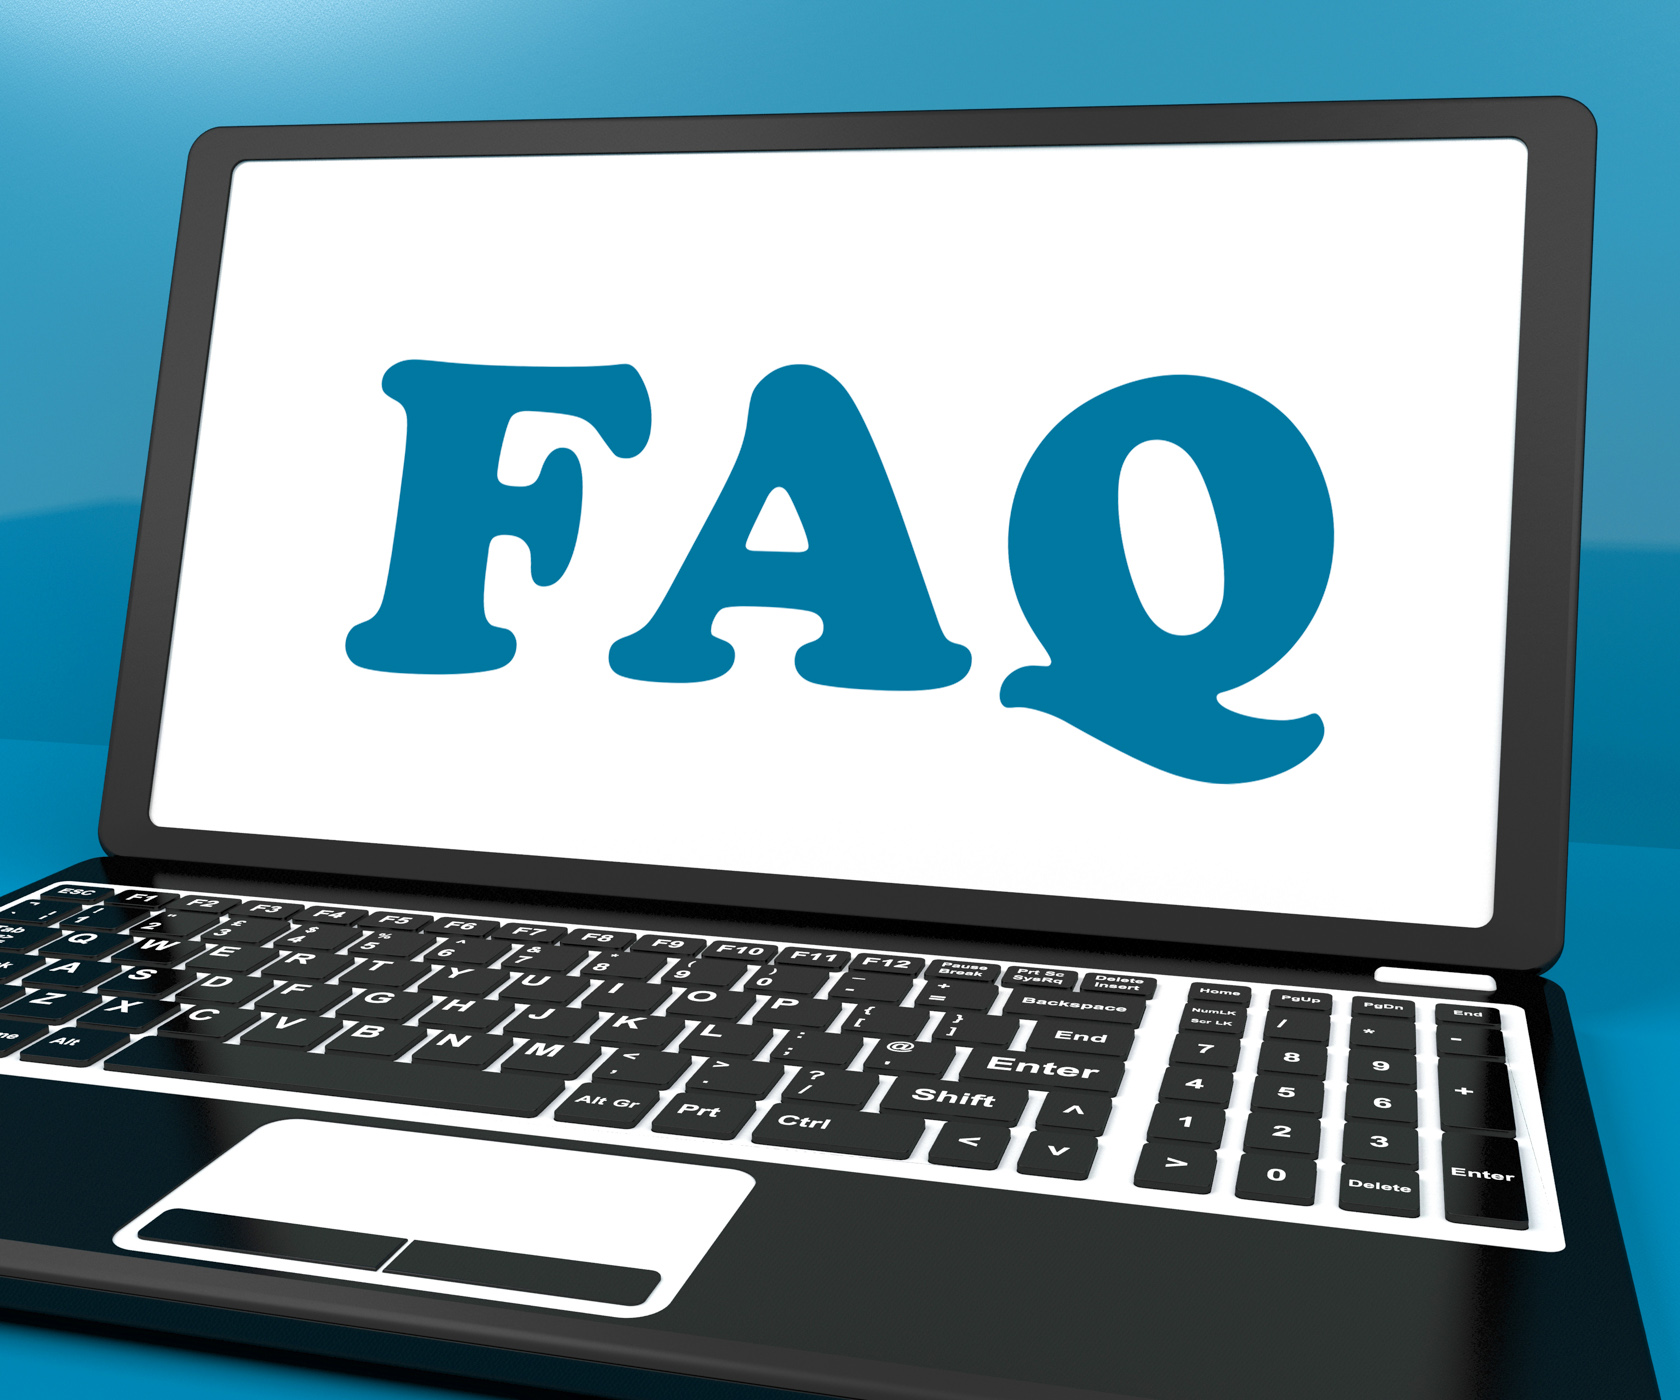 Faq on laptop shows solution and frequently asked questions online photo